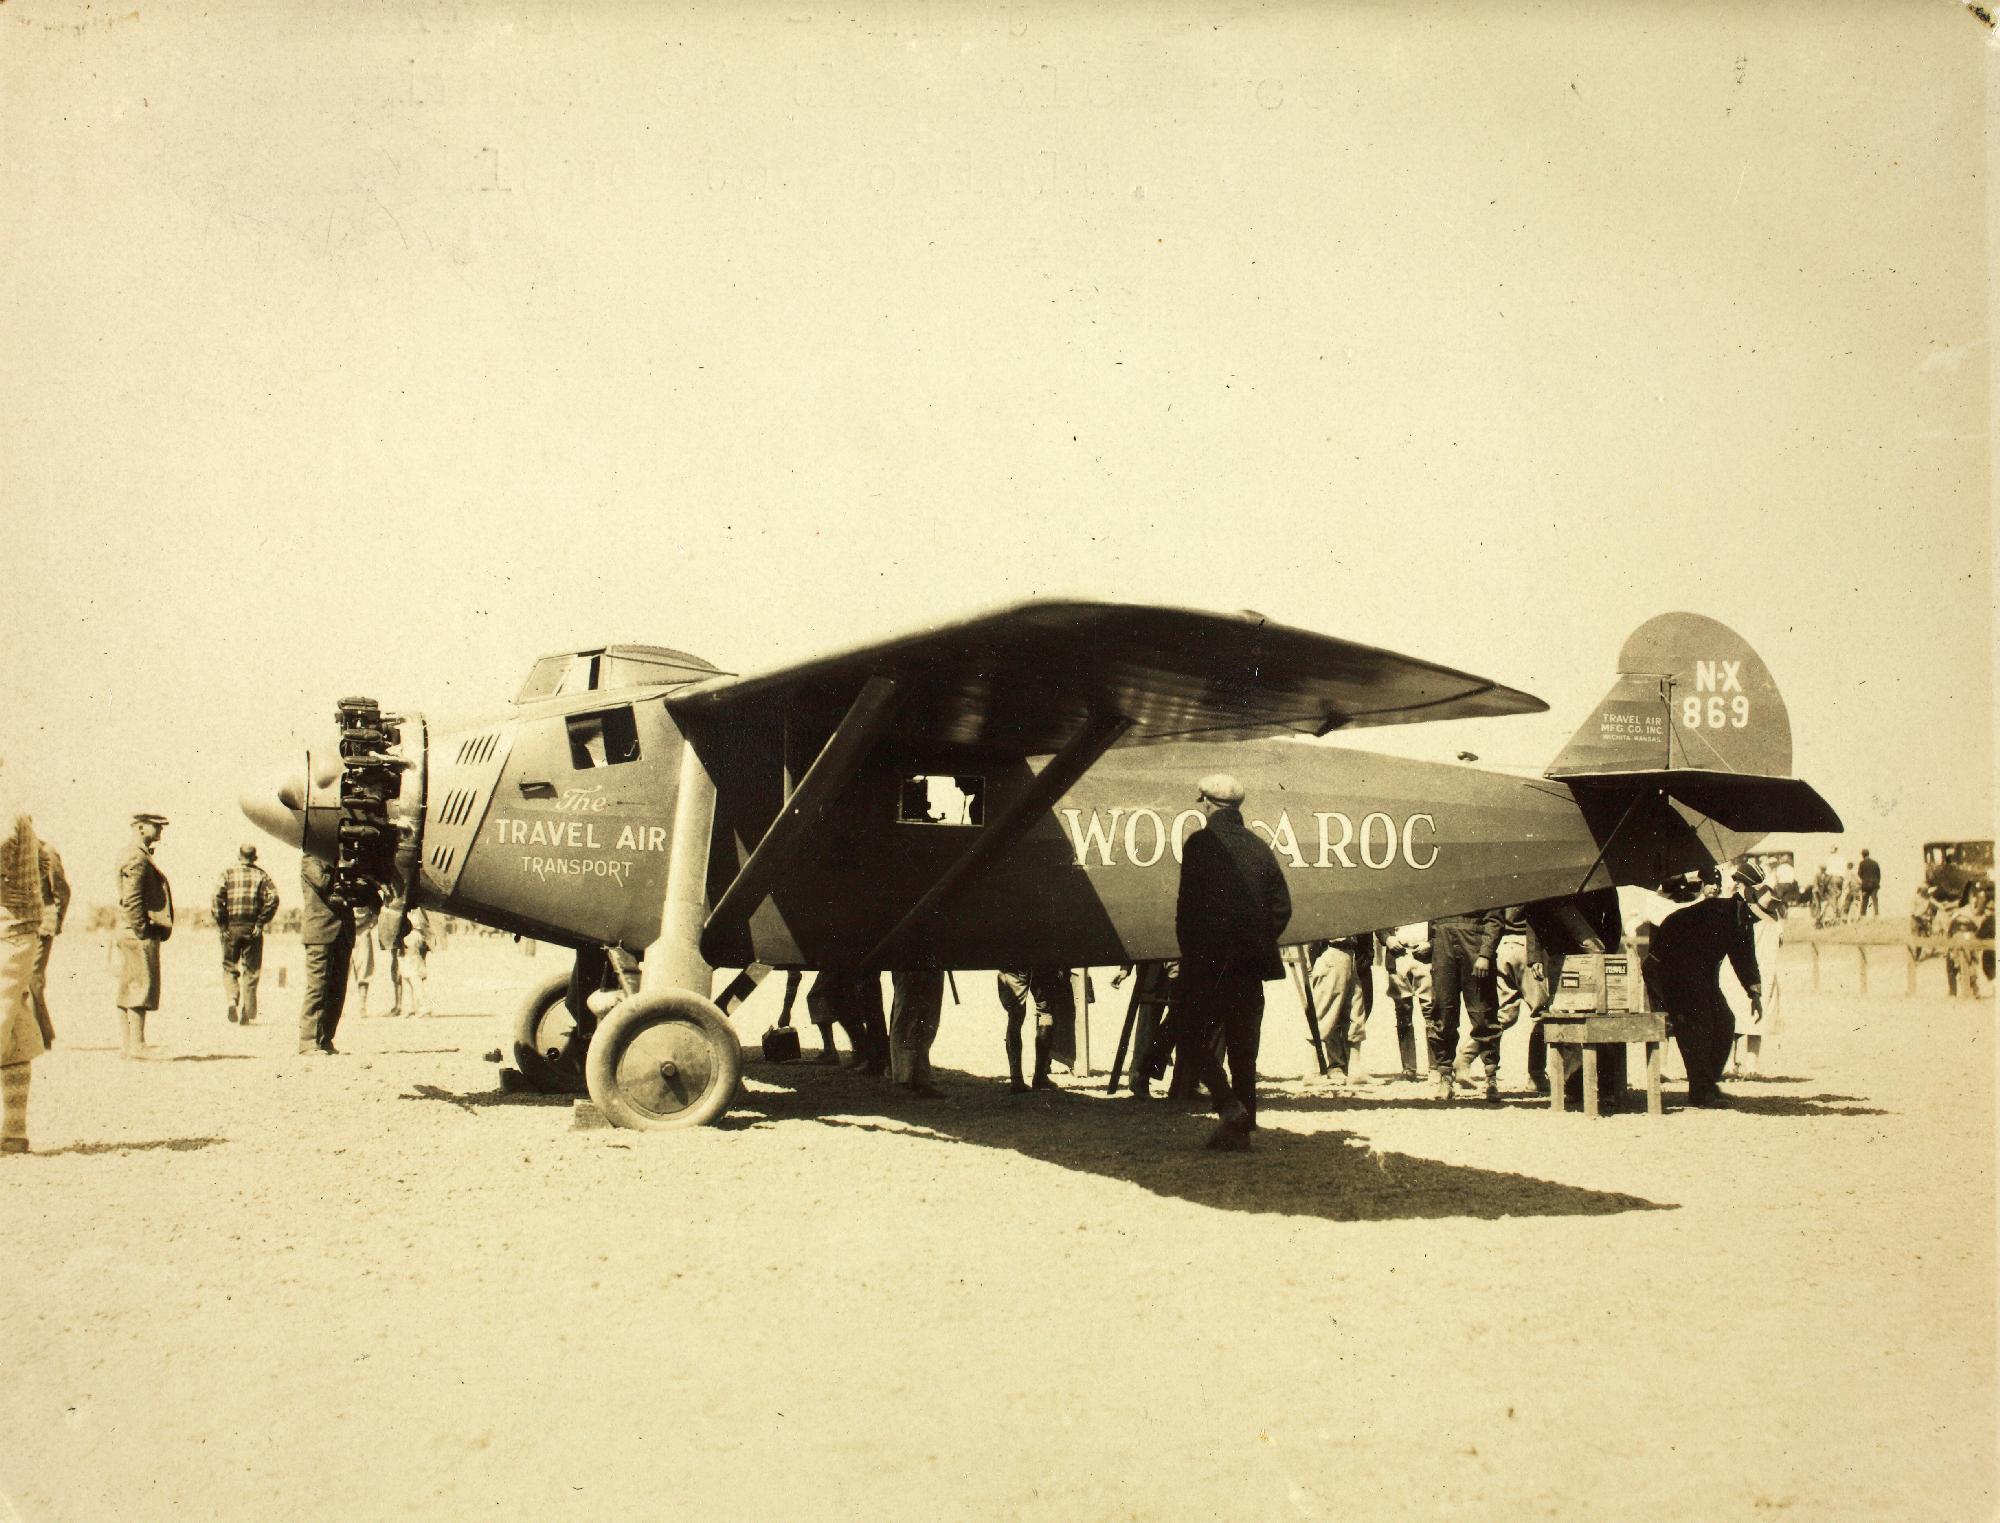 The Travel Air 5000 NX896, Woolaroc, being prepared for the Trans-Pacifc flight at Oakland, California, 16 August 1927. The airplane has been placed in flight attitude for calibration of its navigation instruments and to be certain the fuel tanks are filled to capacity. (San Diego Air and Space Museum Archives)